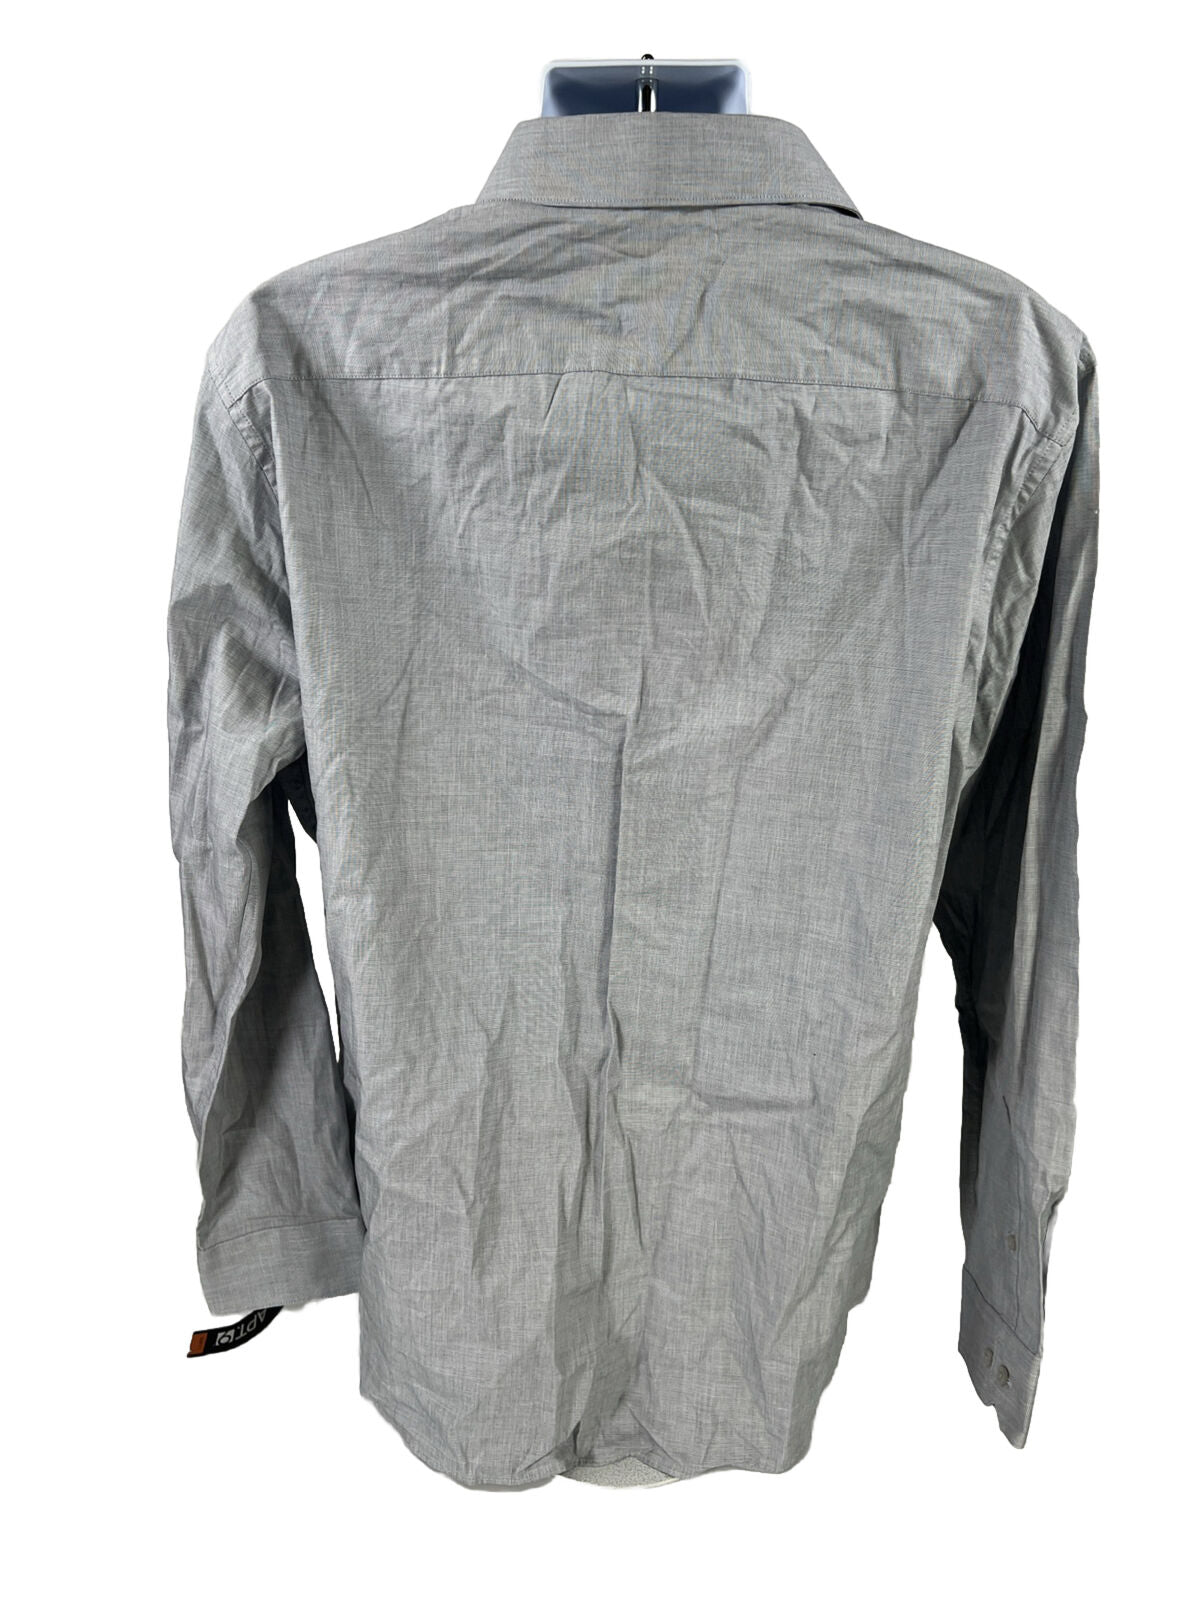 NEW Apt.9 Men's Gray Slim Fit Button Up Casual Shirt - XL